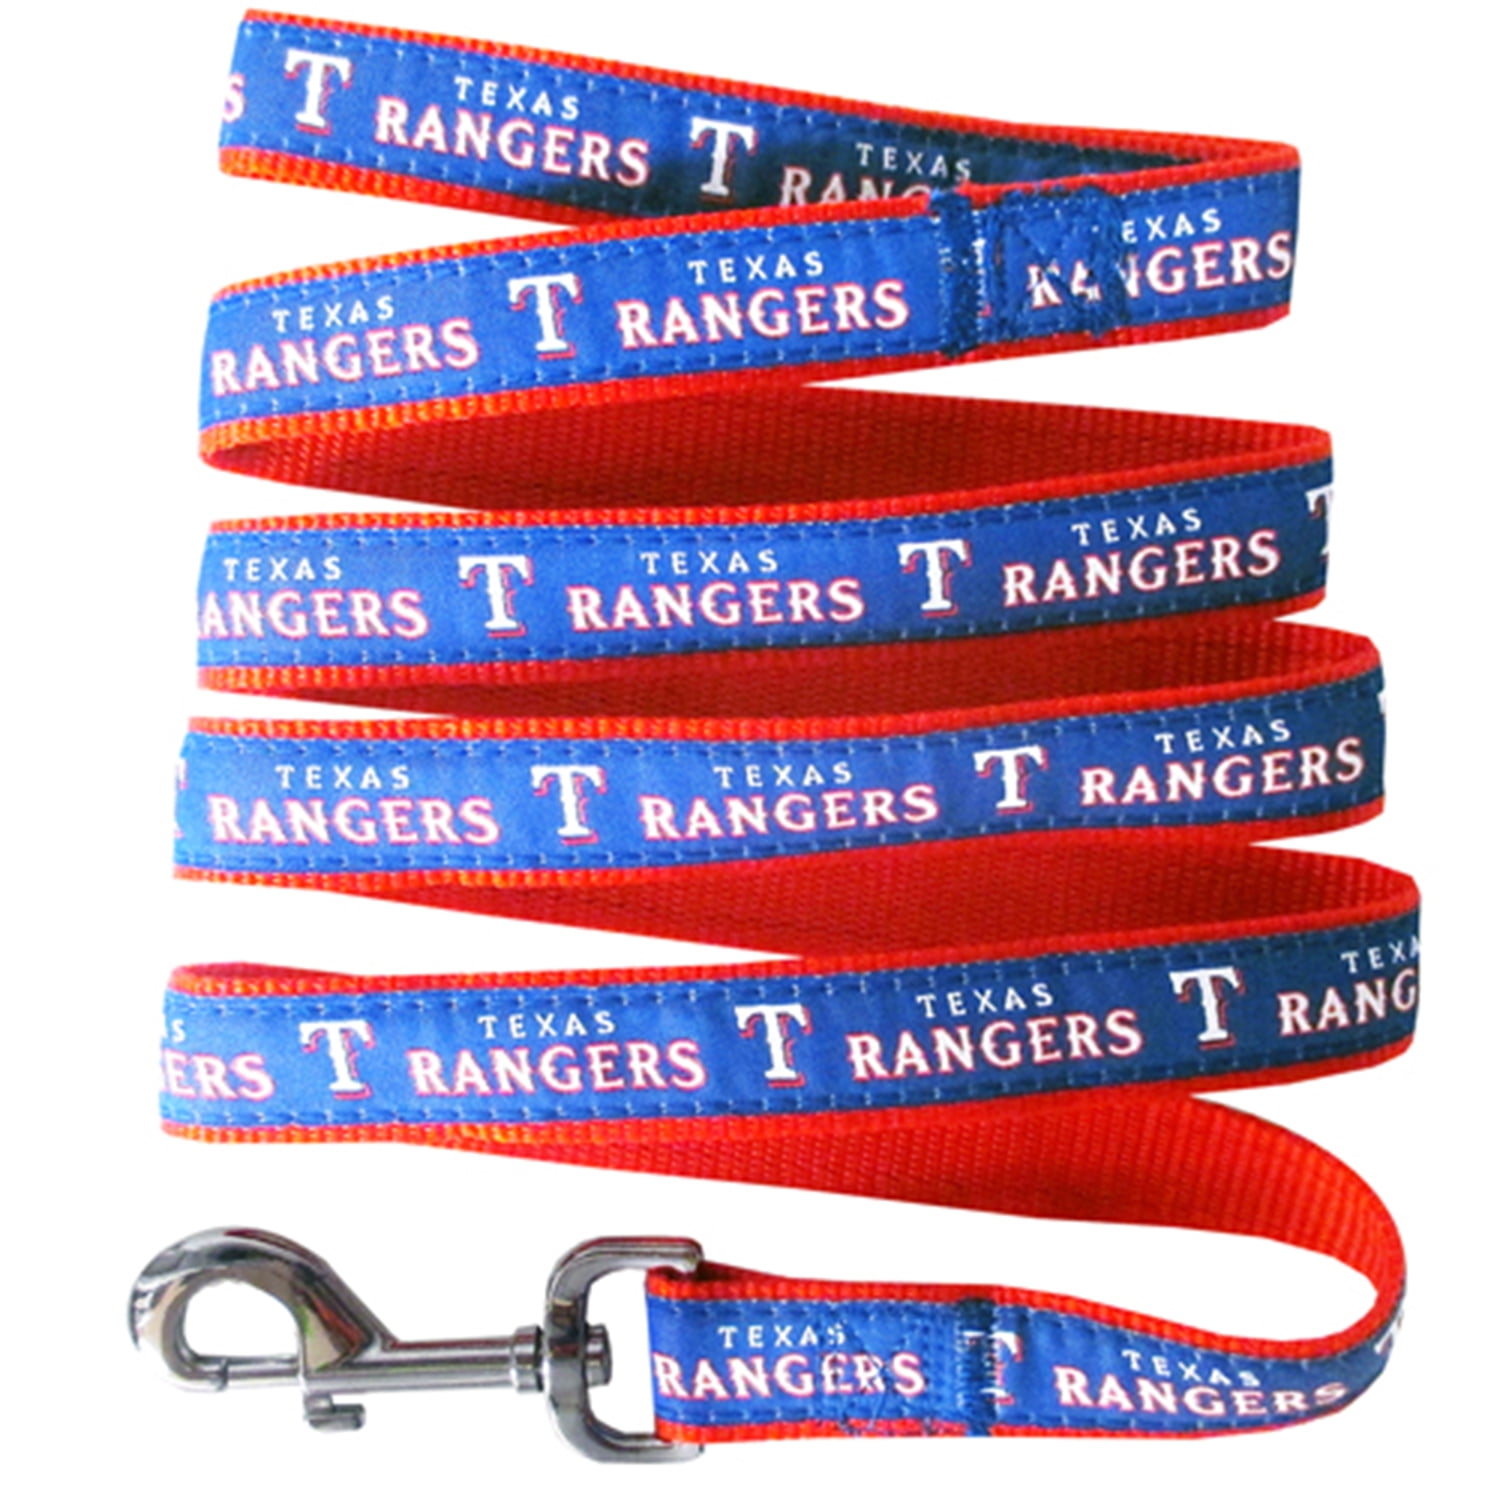 MLB DOG COLLAR. - 29 Baseball Teams available in 4 Sizes. Heavy-Duty,  Strong & Durable Pet Collar. - MLB Licensed PET COLLAR.